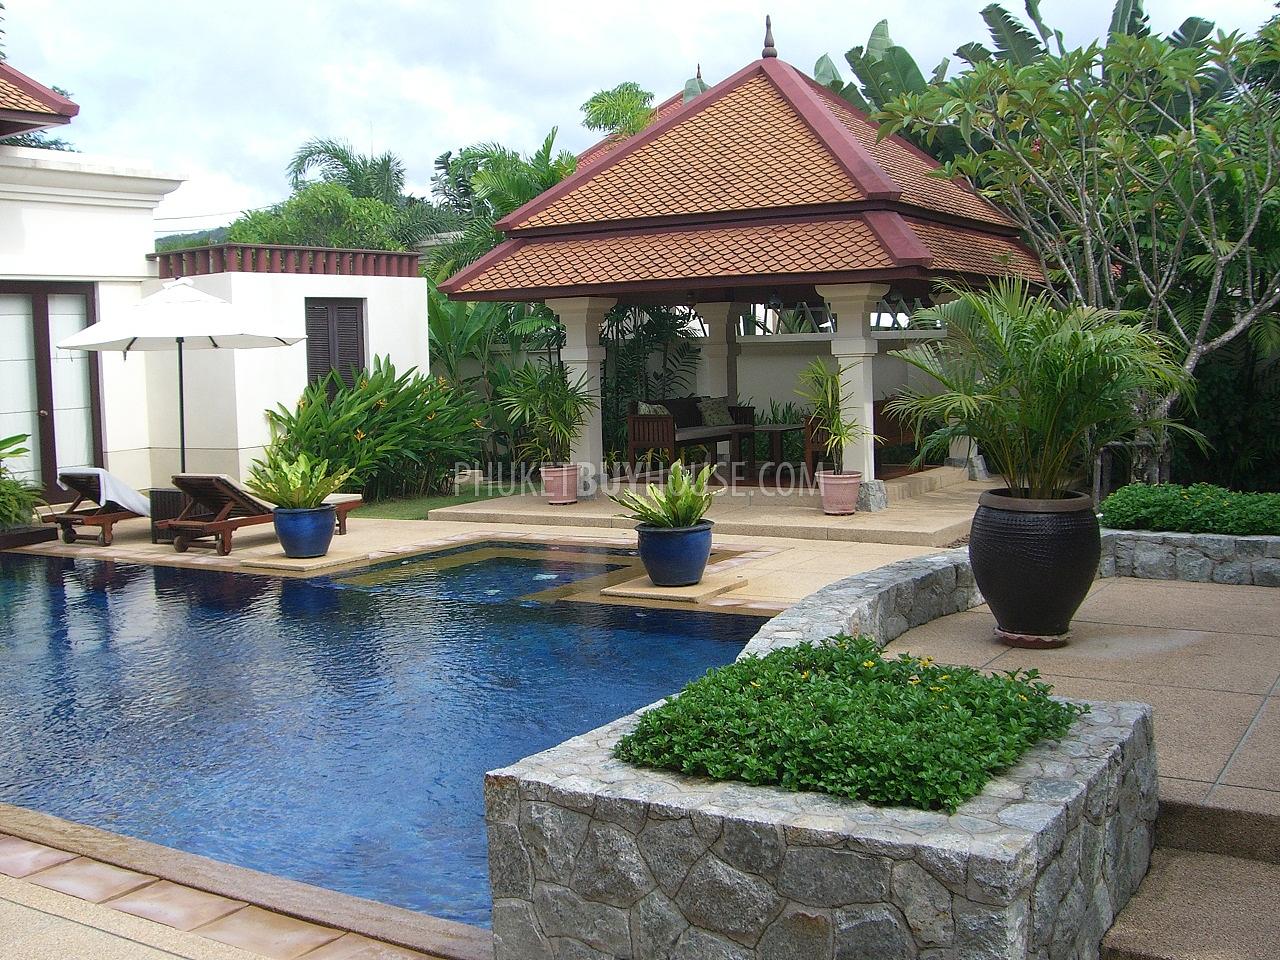 BAN1211: Villa with overlooks the Pool and exquisite Thai garden. Фото #8